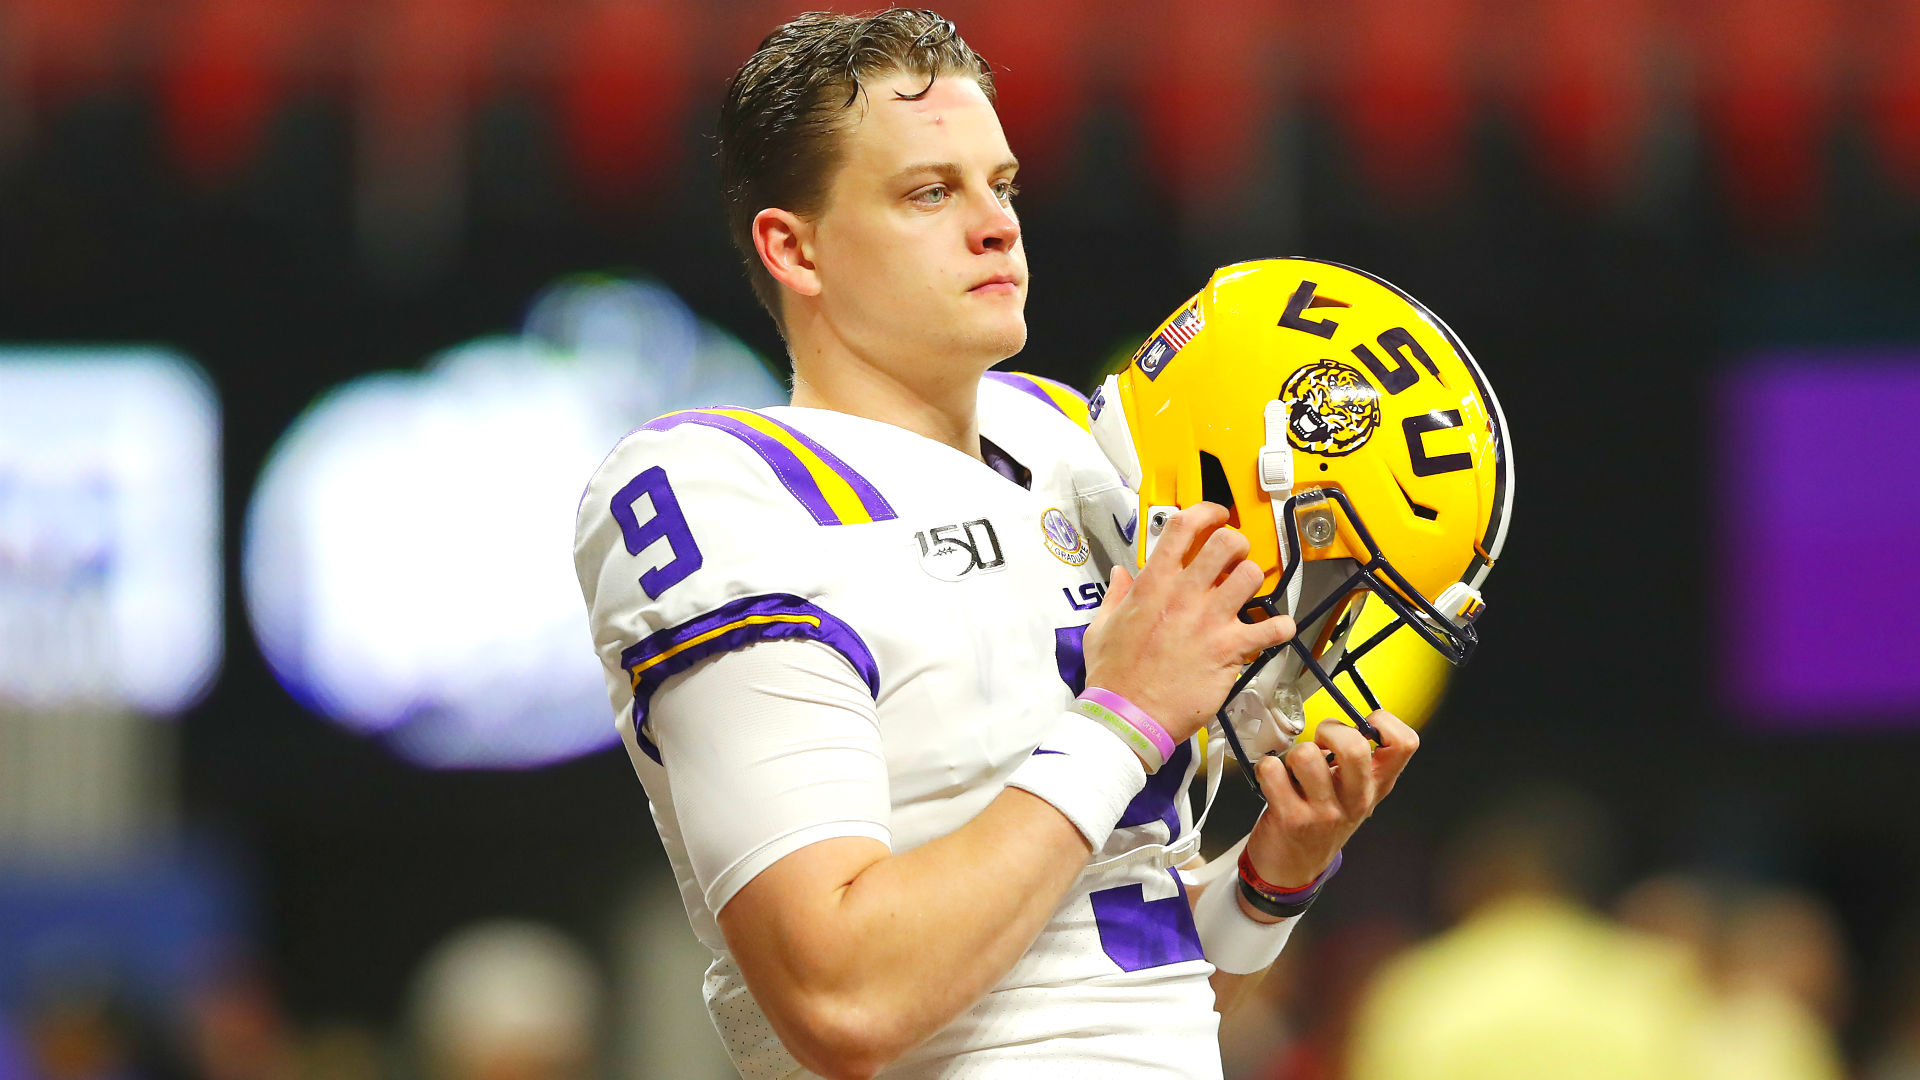 Get to know Joe Burrow, from Ohio's Mr. Football, transfer to LSU & a